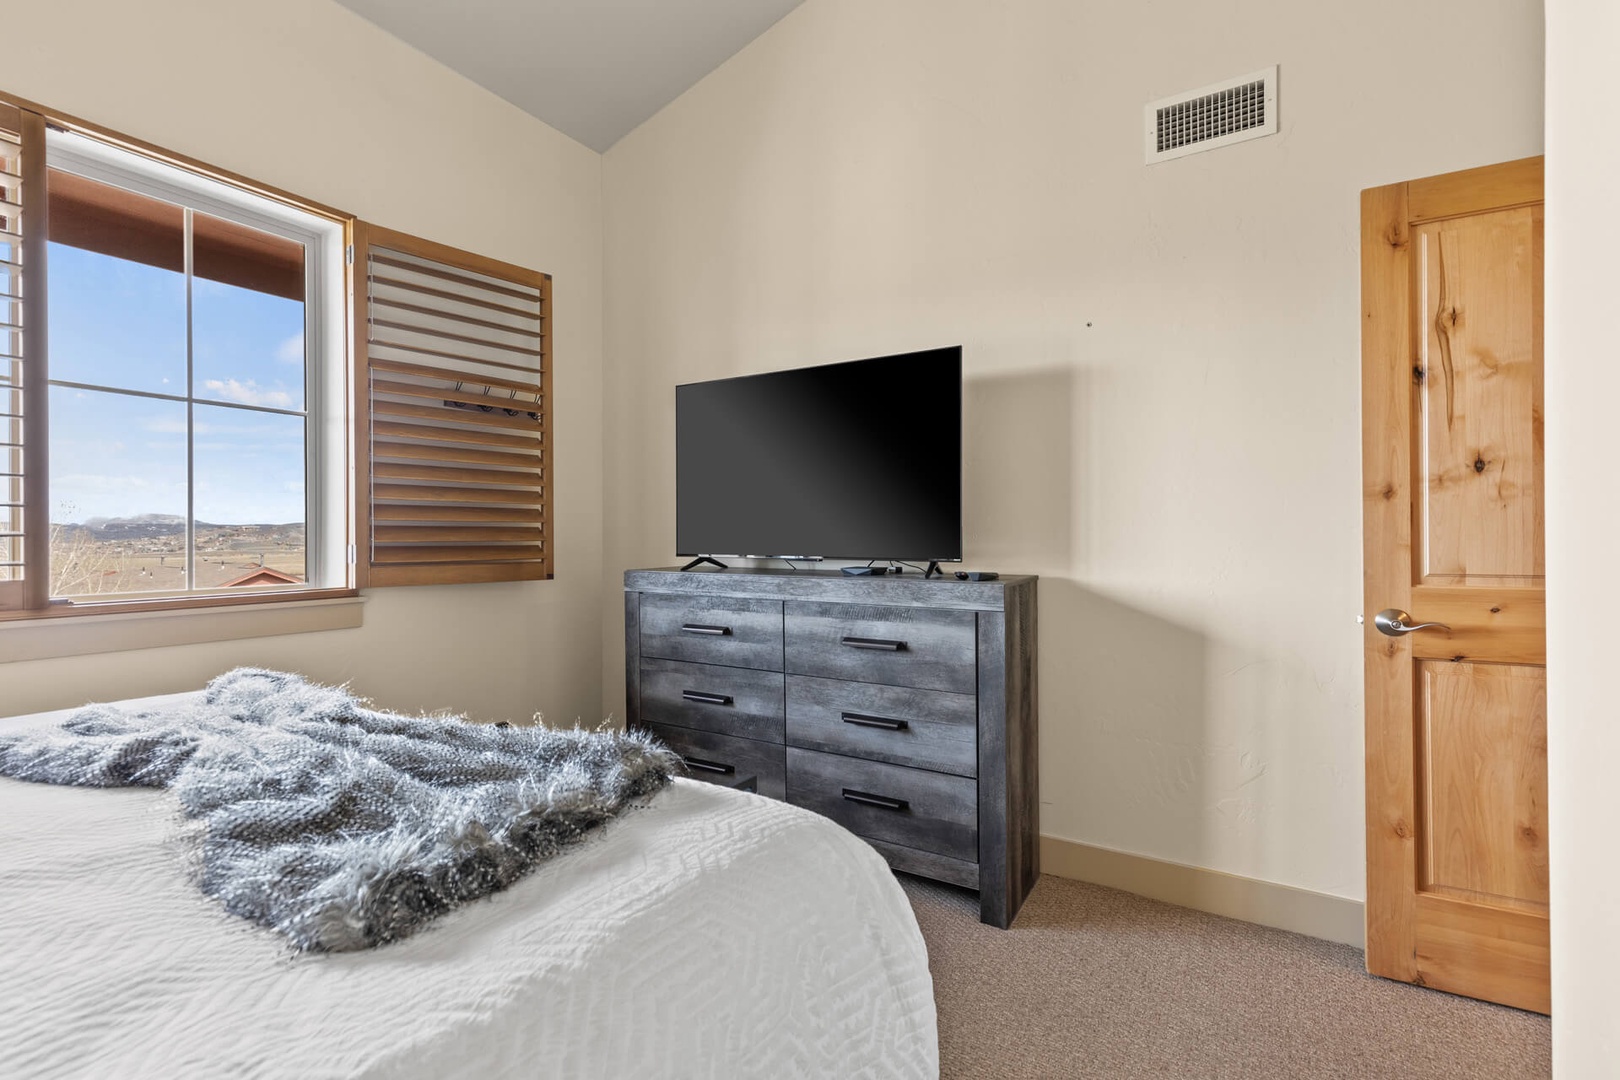 Bear Hollow Lodges 1313:  The primary bed room HDTV and storage for unpacking and storing your favorite items.